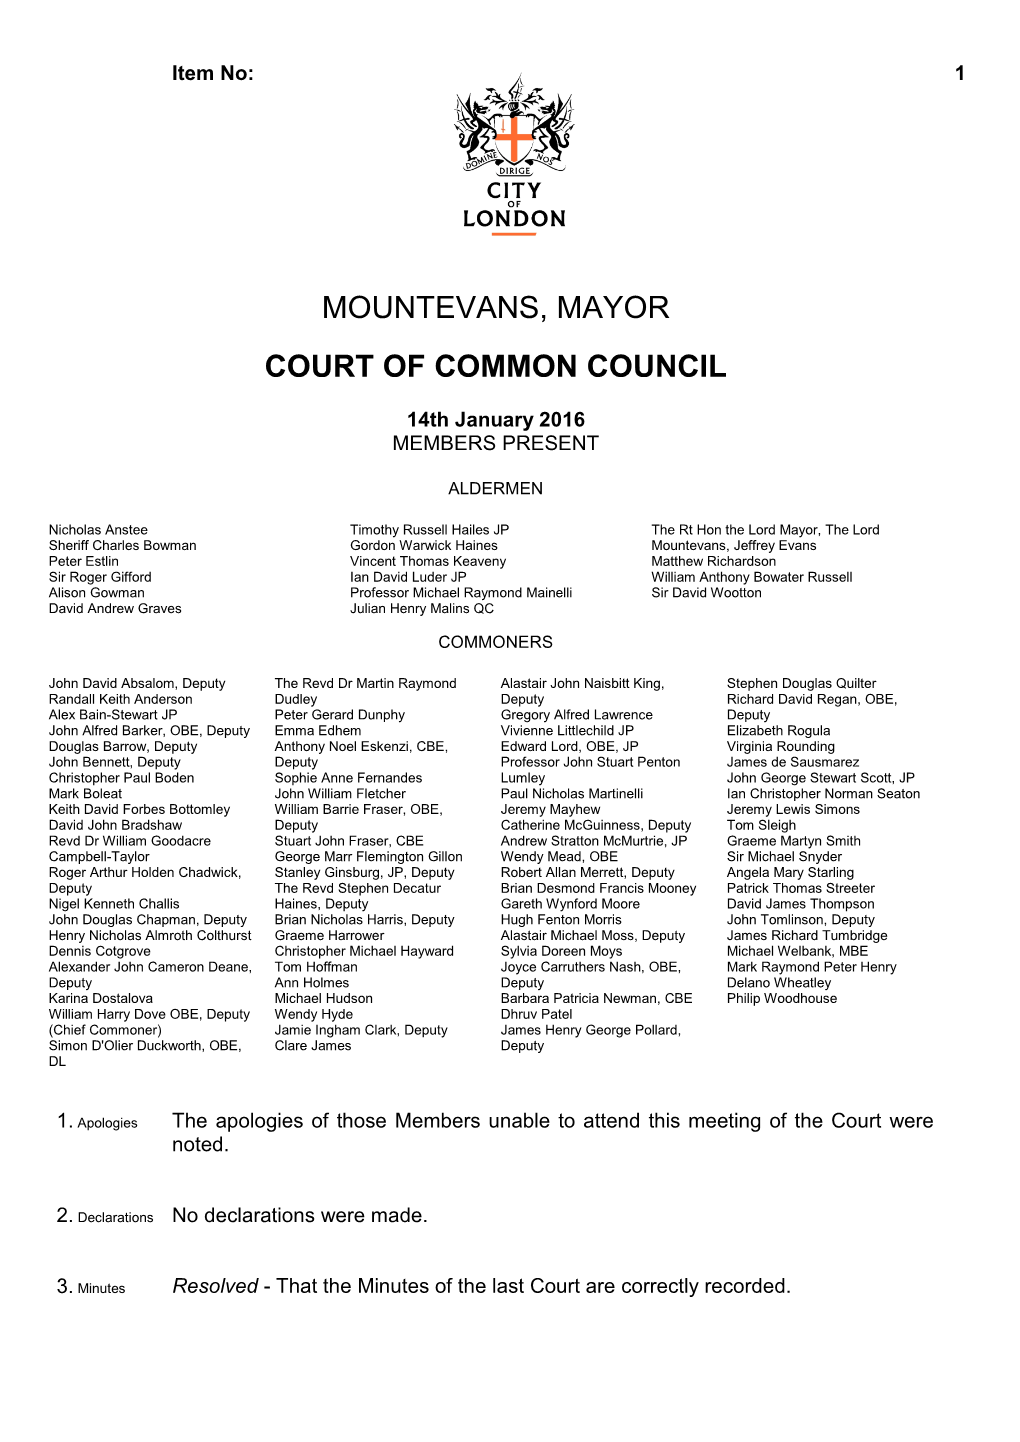 Mountevans, Mayor Court of Common Council